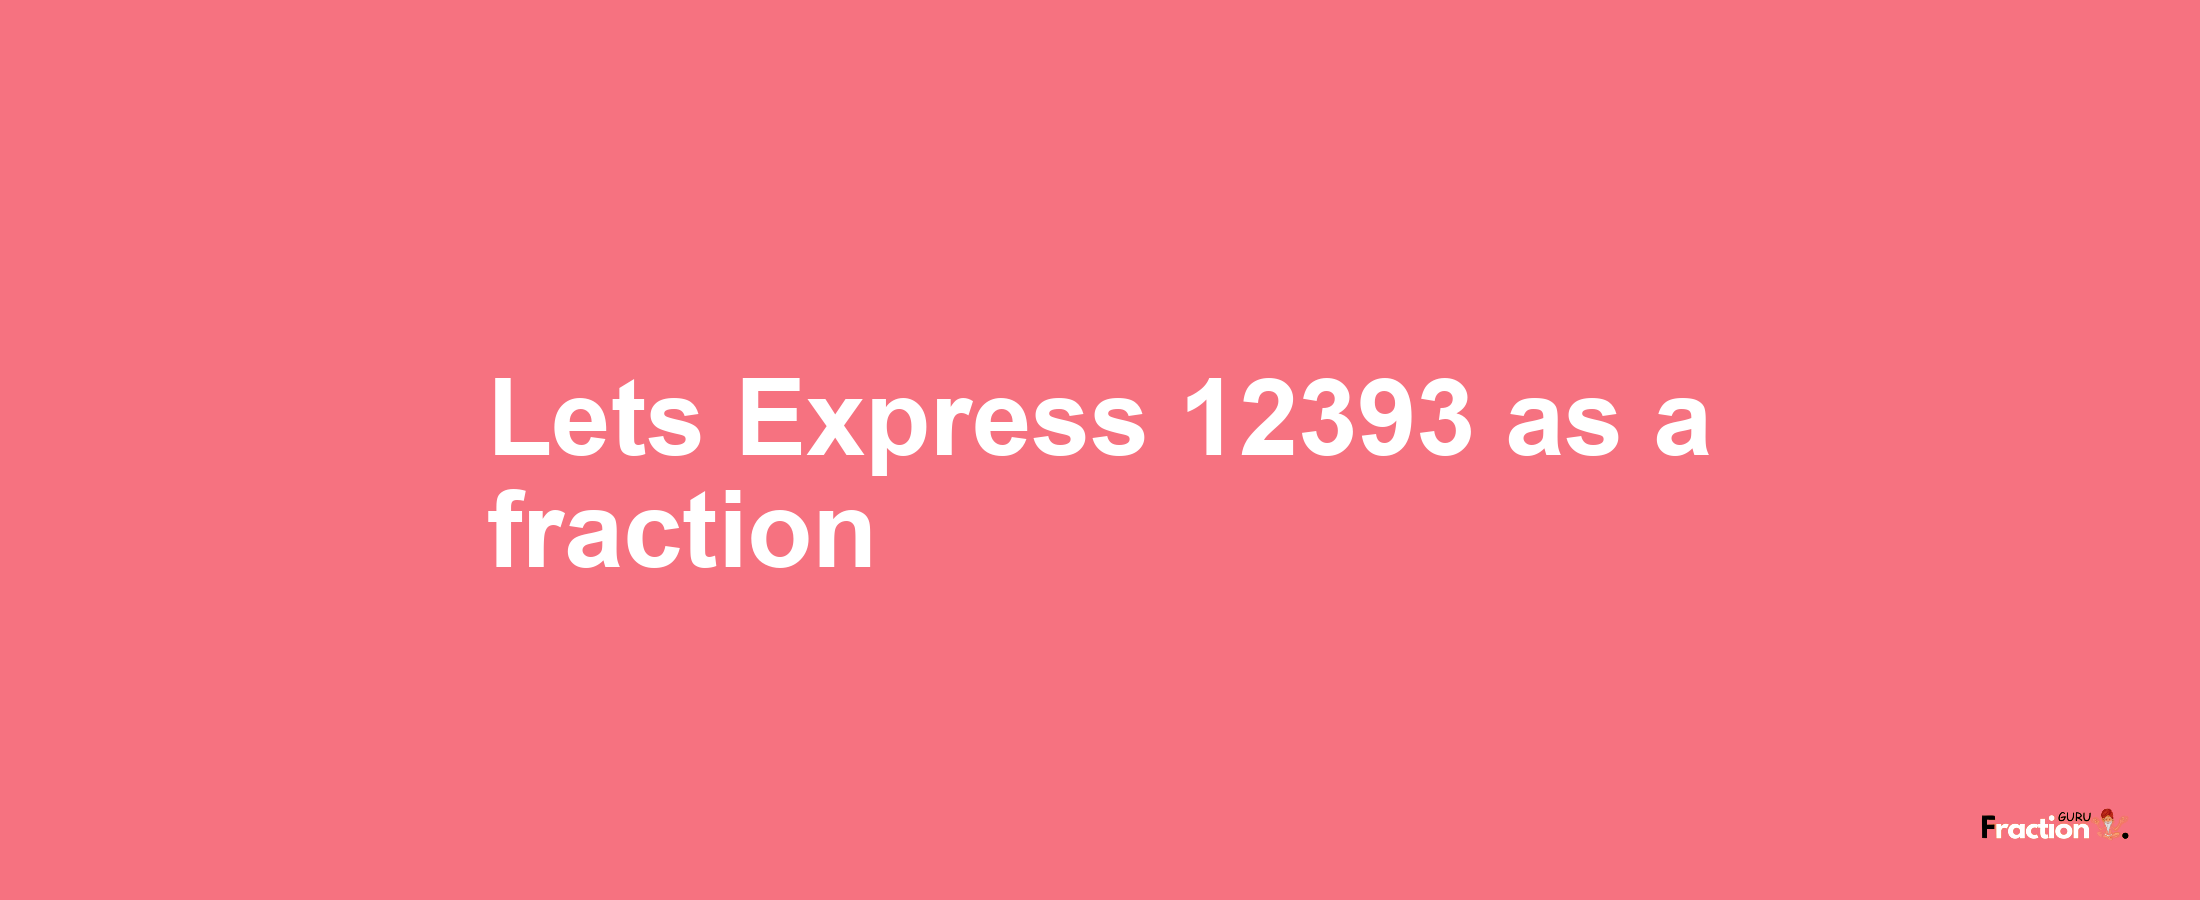 Lets Express 12393 as afraction